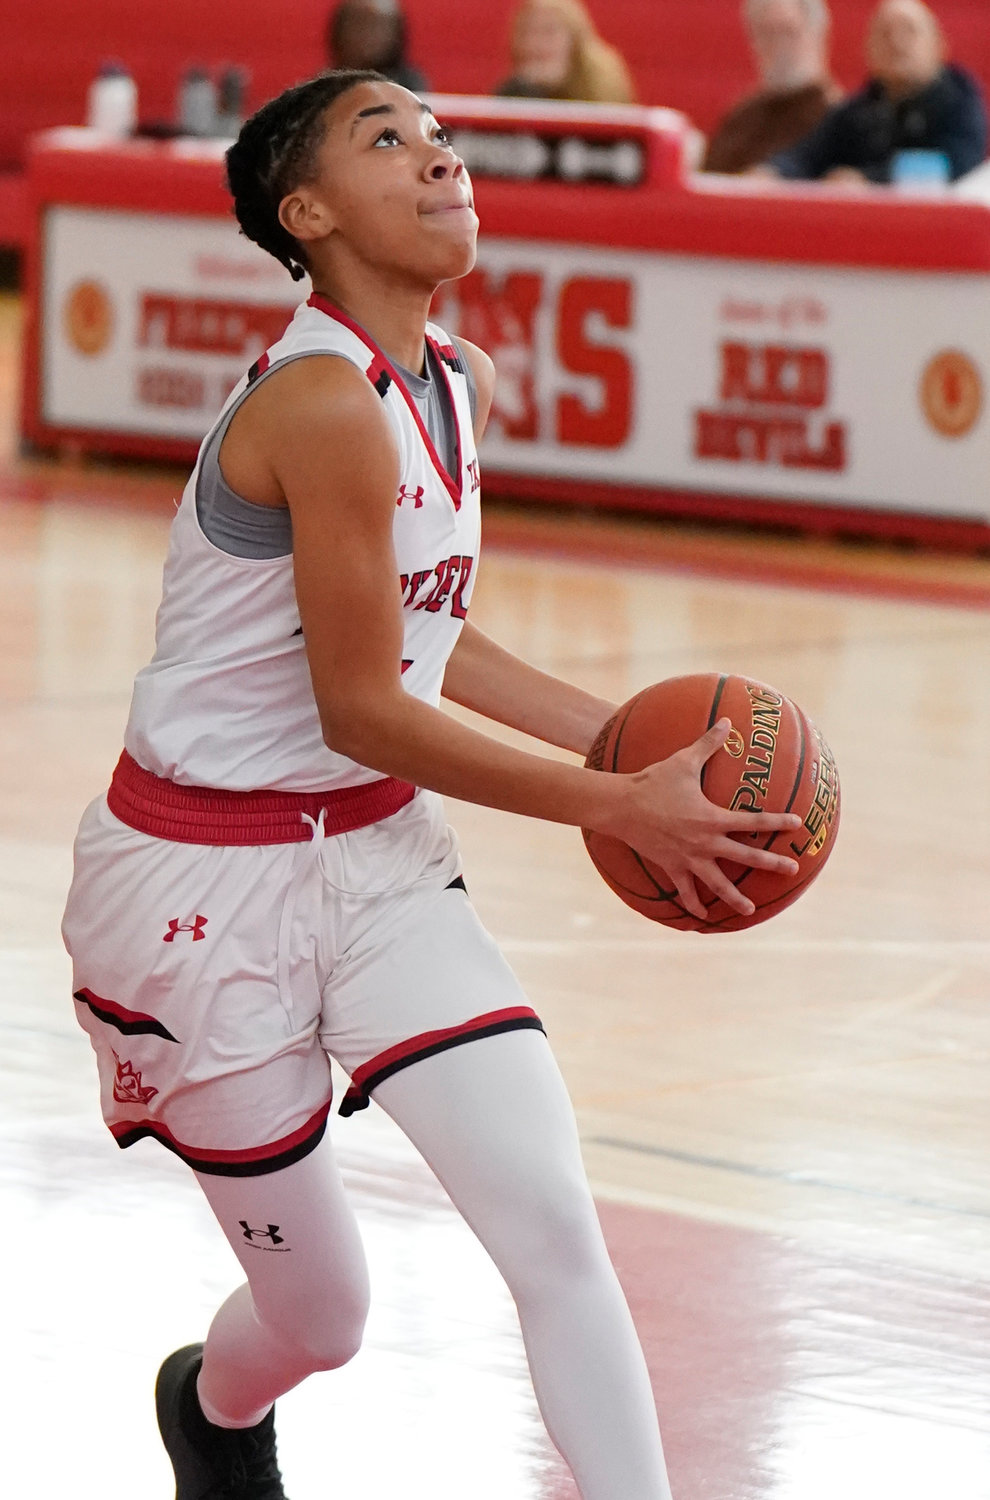 Senior point guard Anayah Lloyd is thriving as the Red Devils’ floor general after missing last season with an injury.